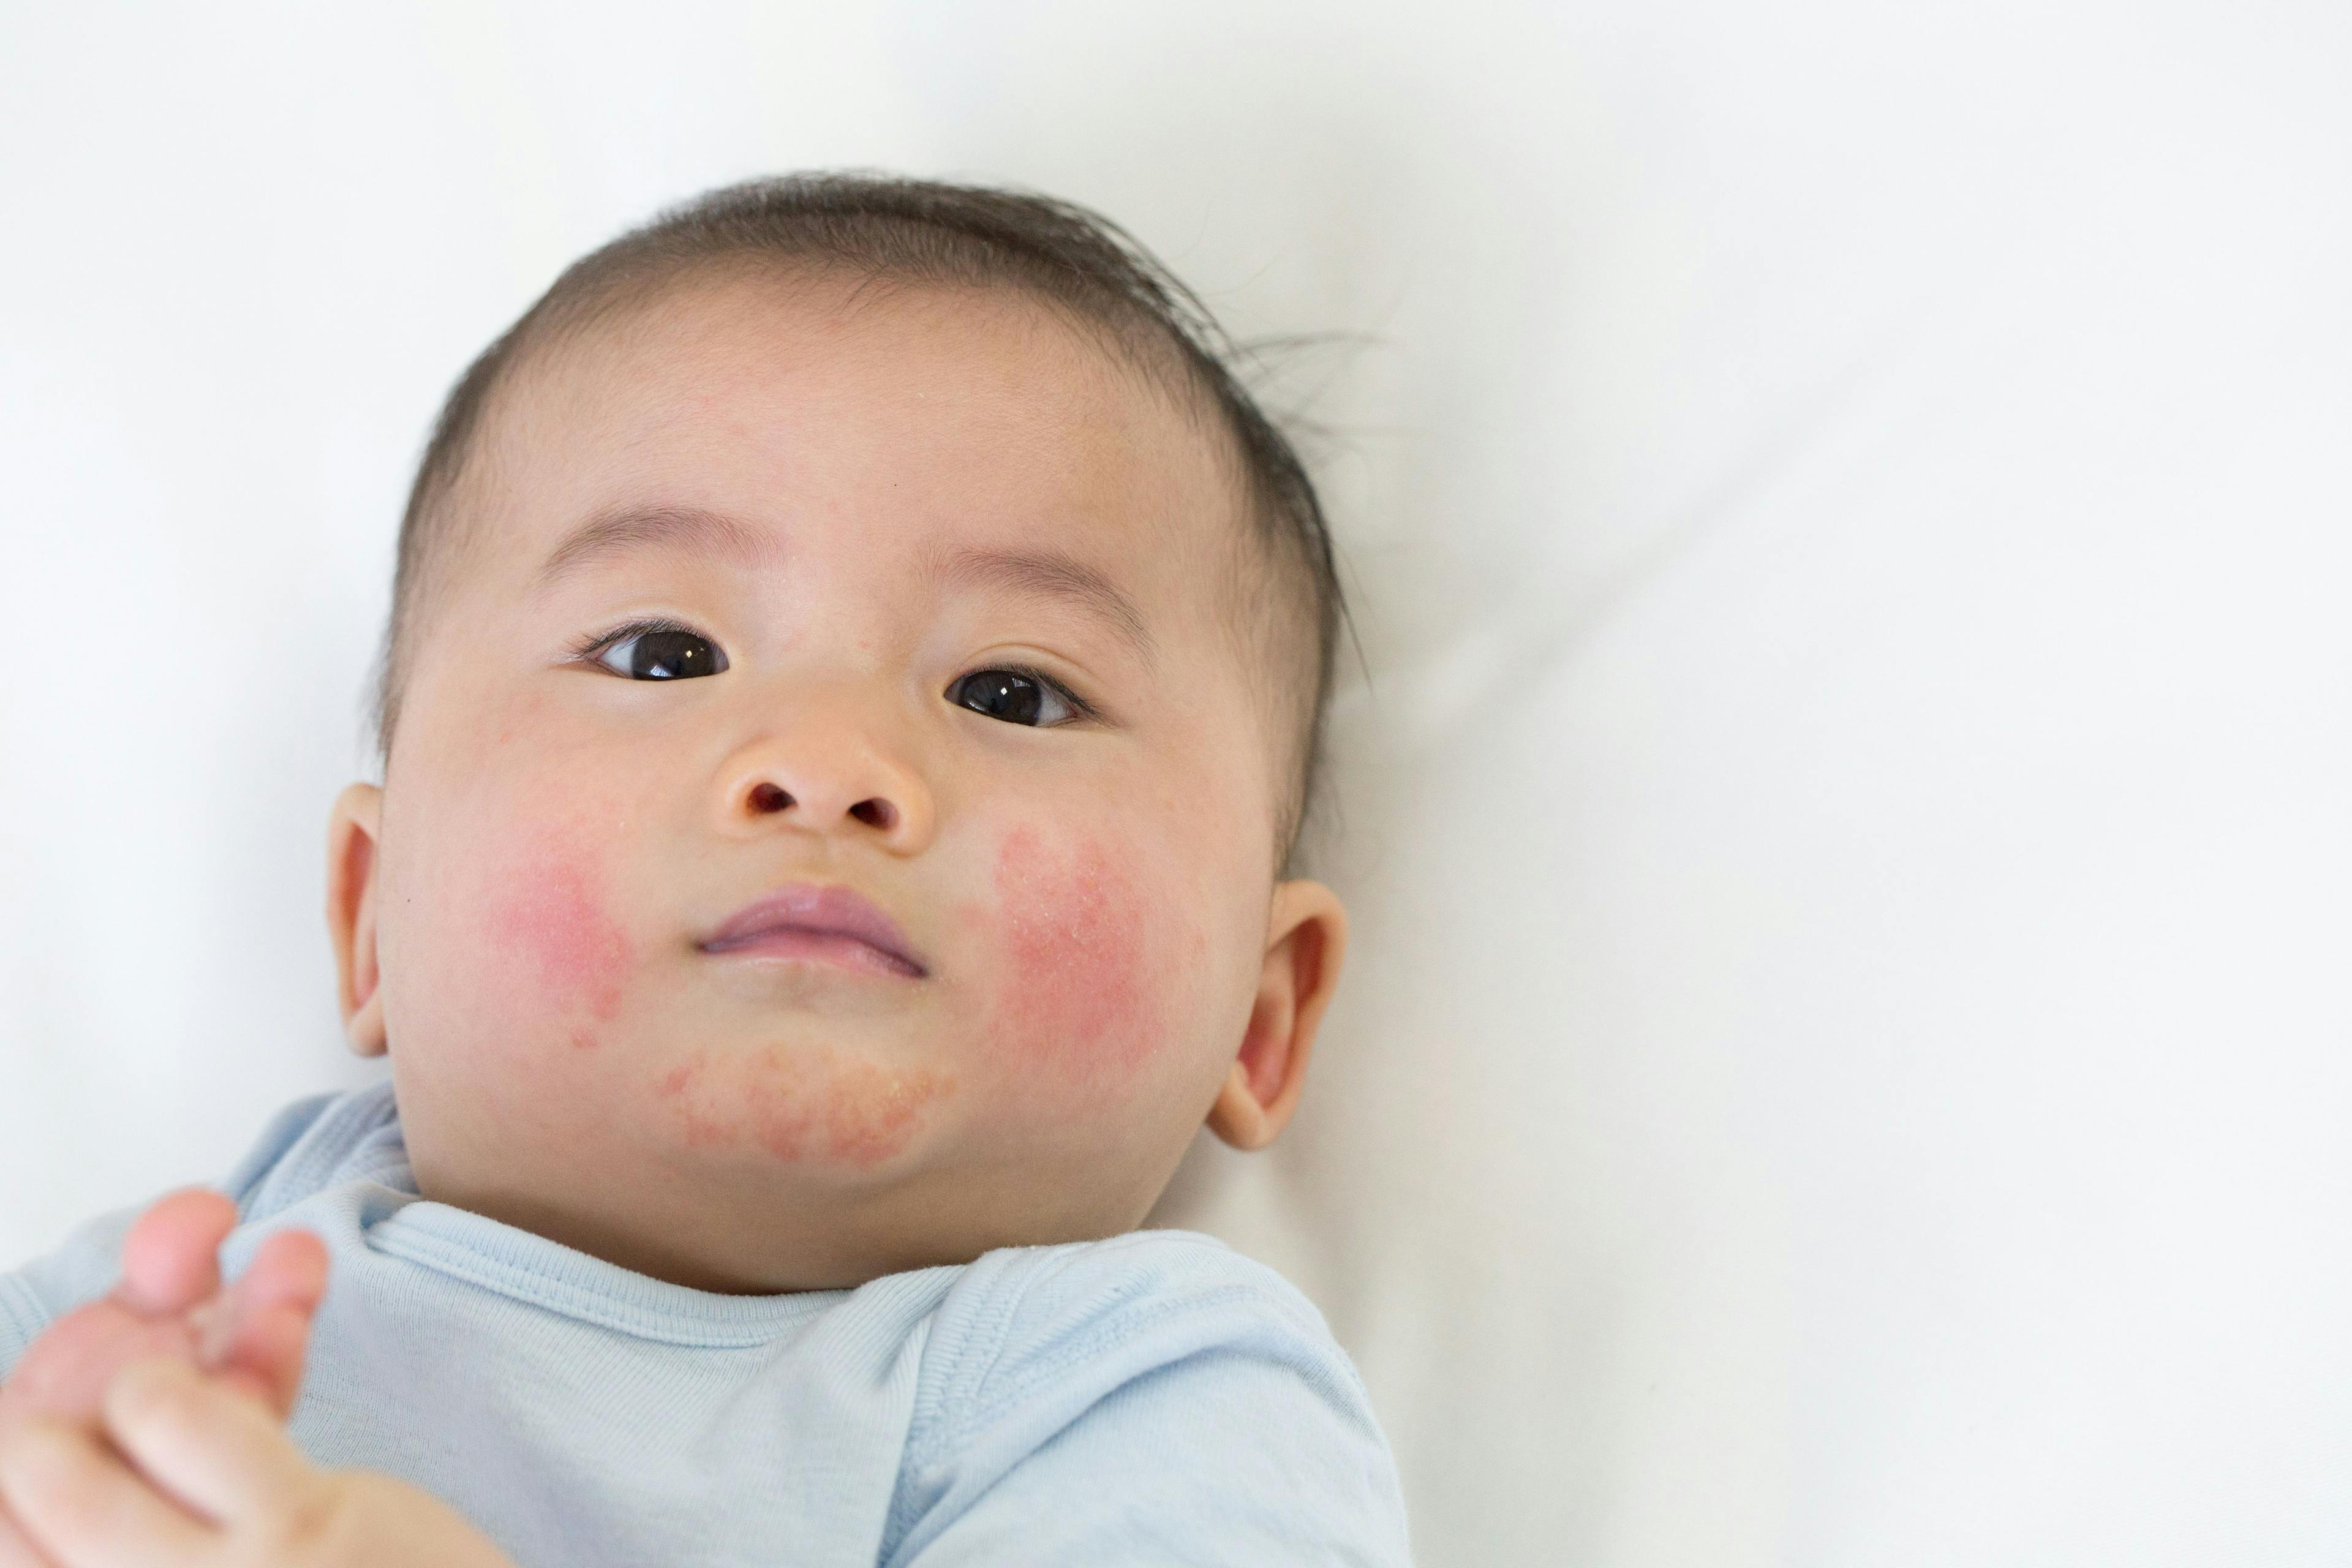 RNA Monitoring Offers Non-Invasive Detection of Infantile Atopic Dermatitis